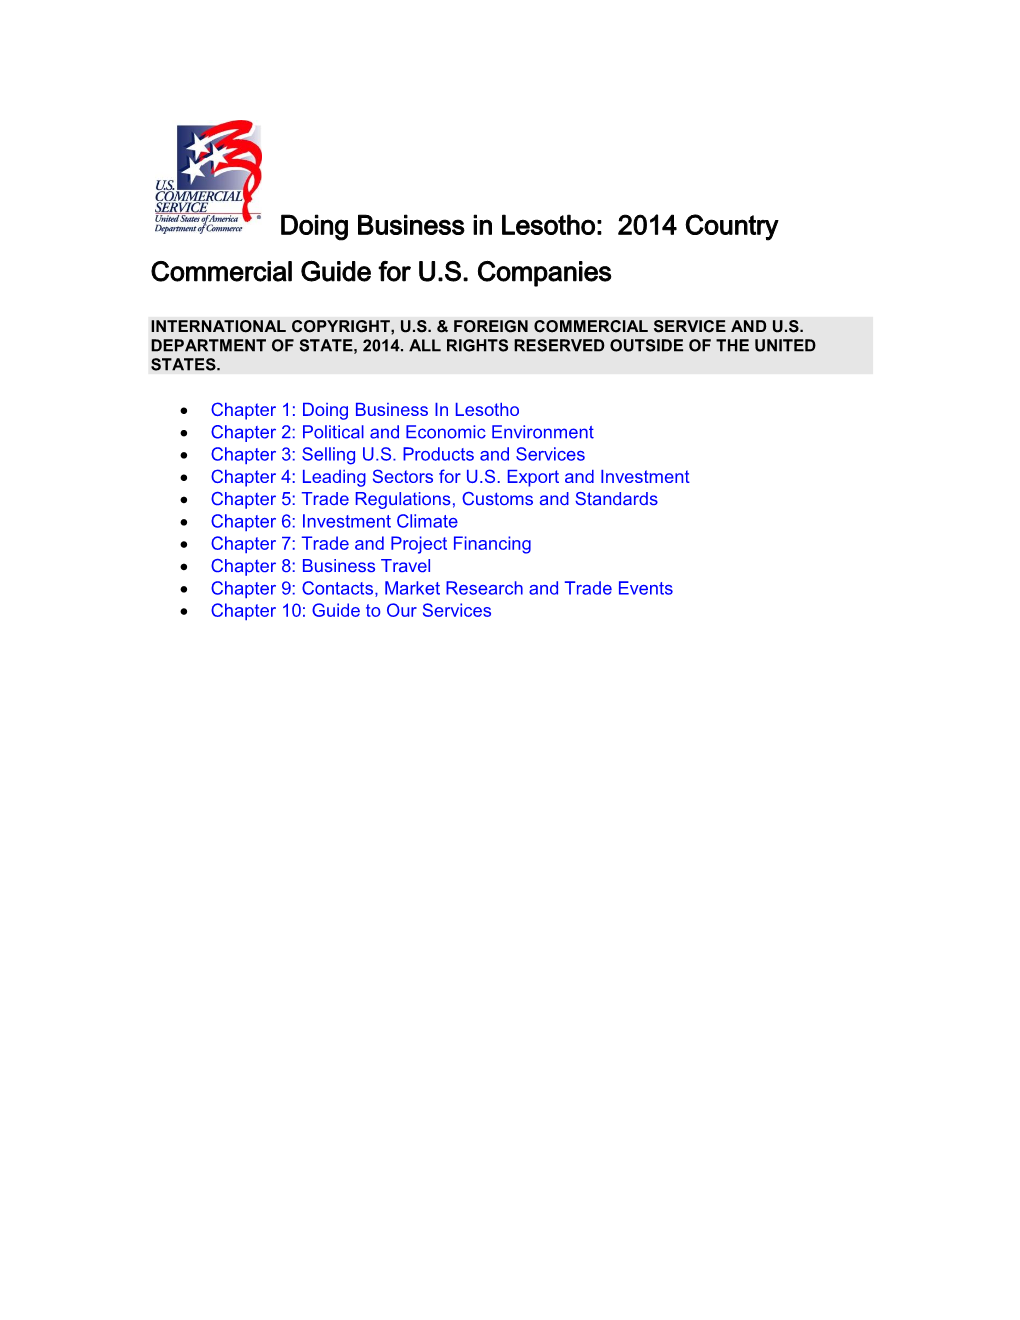 Doing Business in Lesotho: 2014 Country Commercial Guide for U.S. Companies